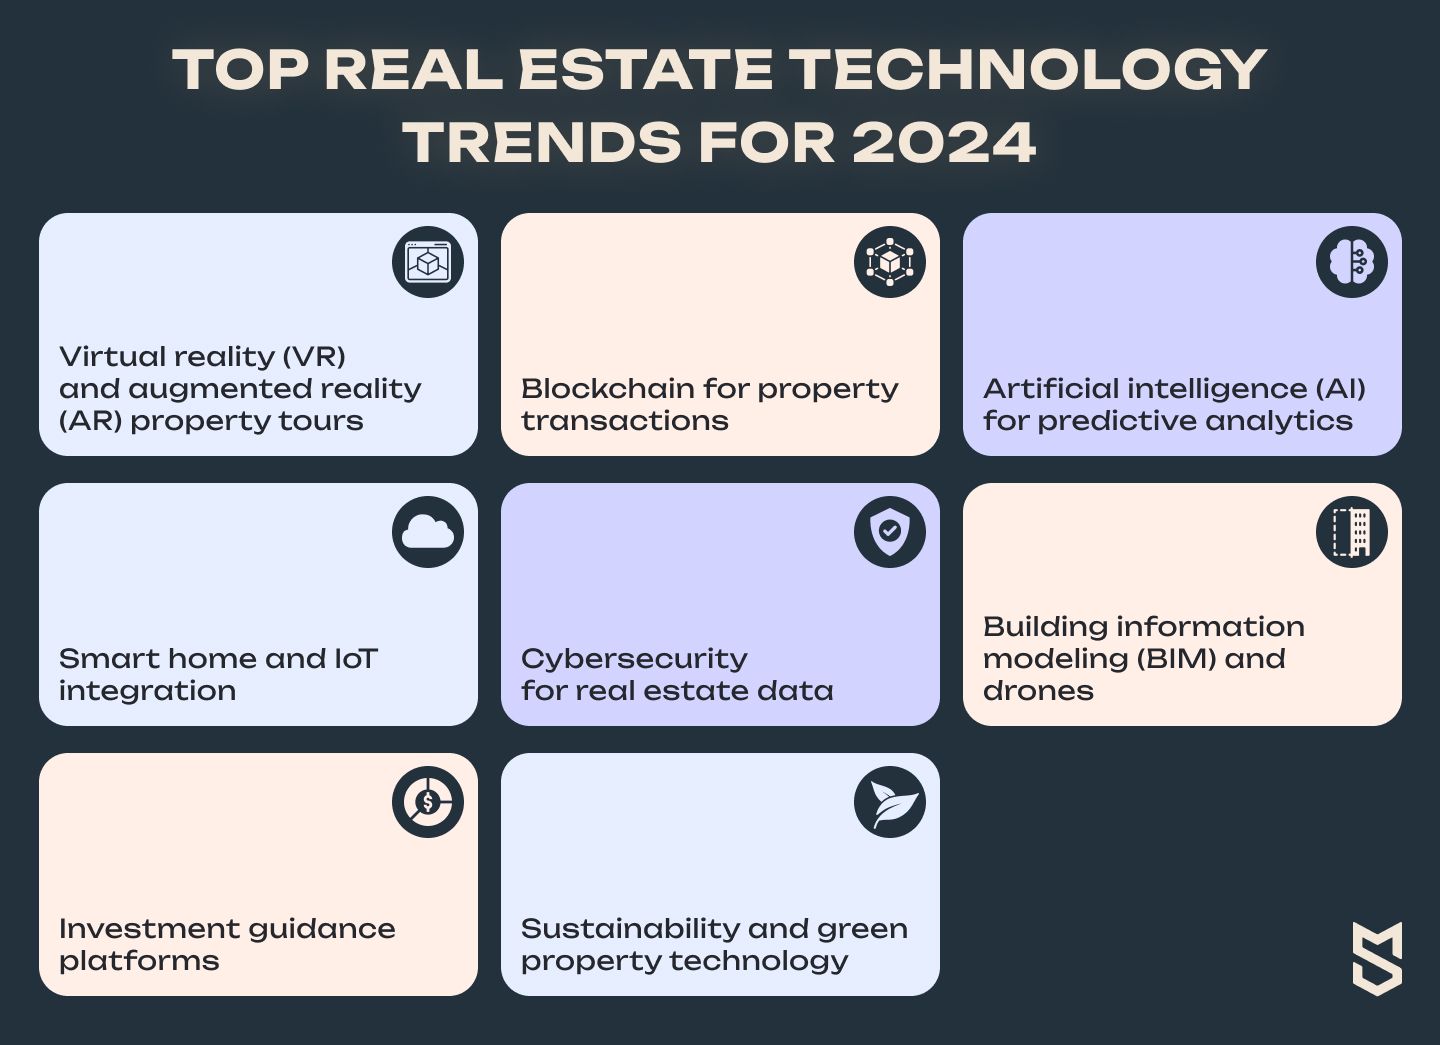 Top real estate technology trends for 2024